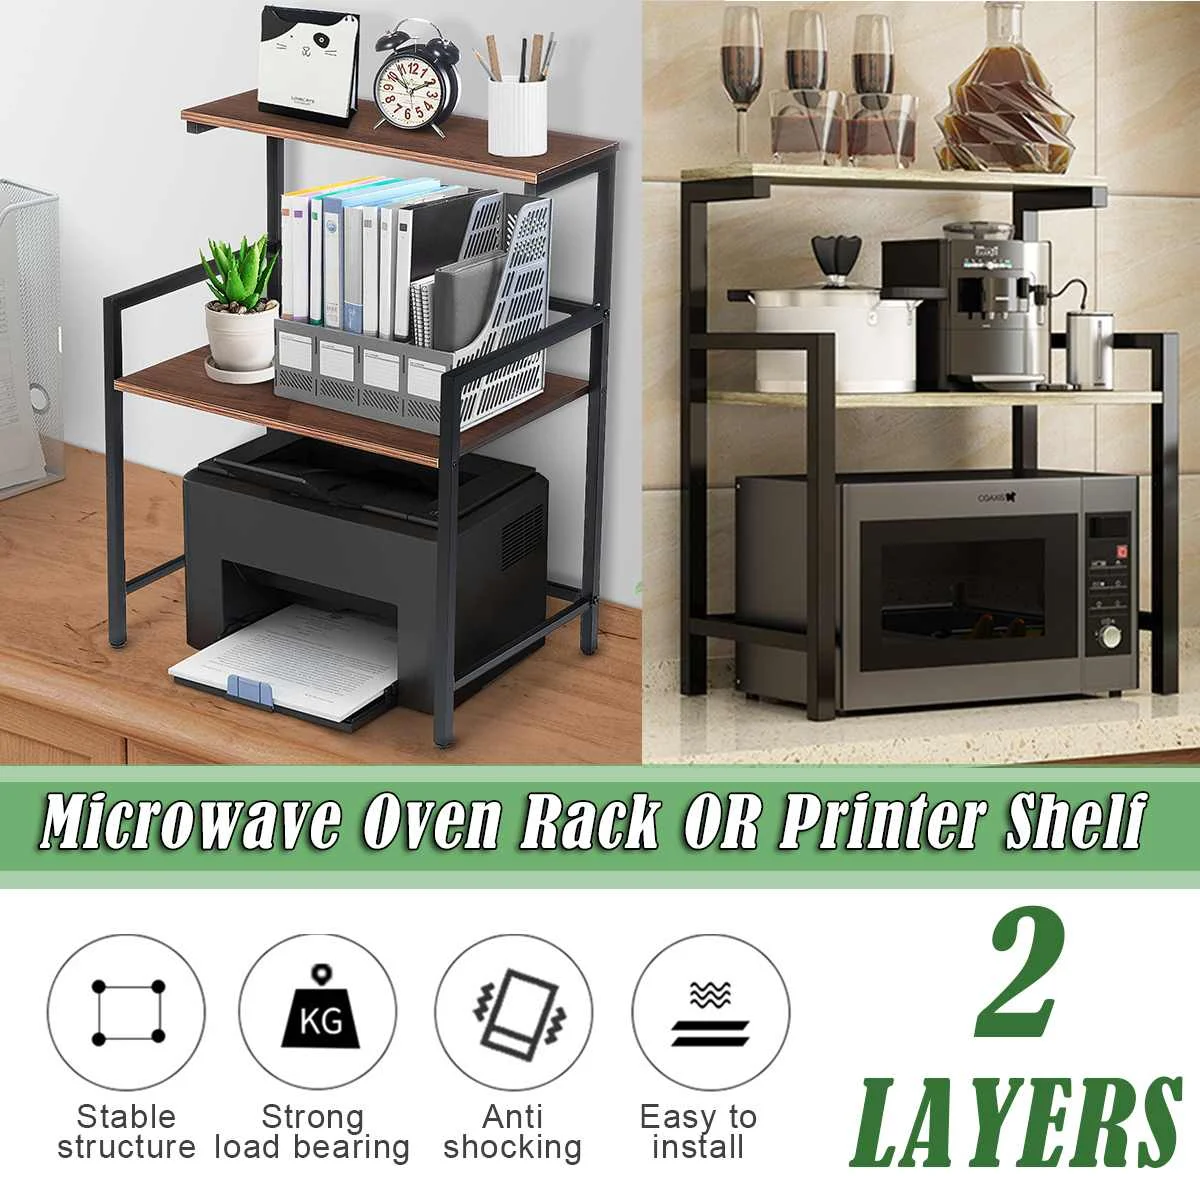 

2 Tiers Kitchen Shelf Microwave Oven Rack Stand Container Storage Holder Spice Expandable Cabinet Home Office Printer Shelfs